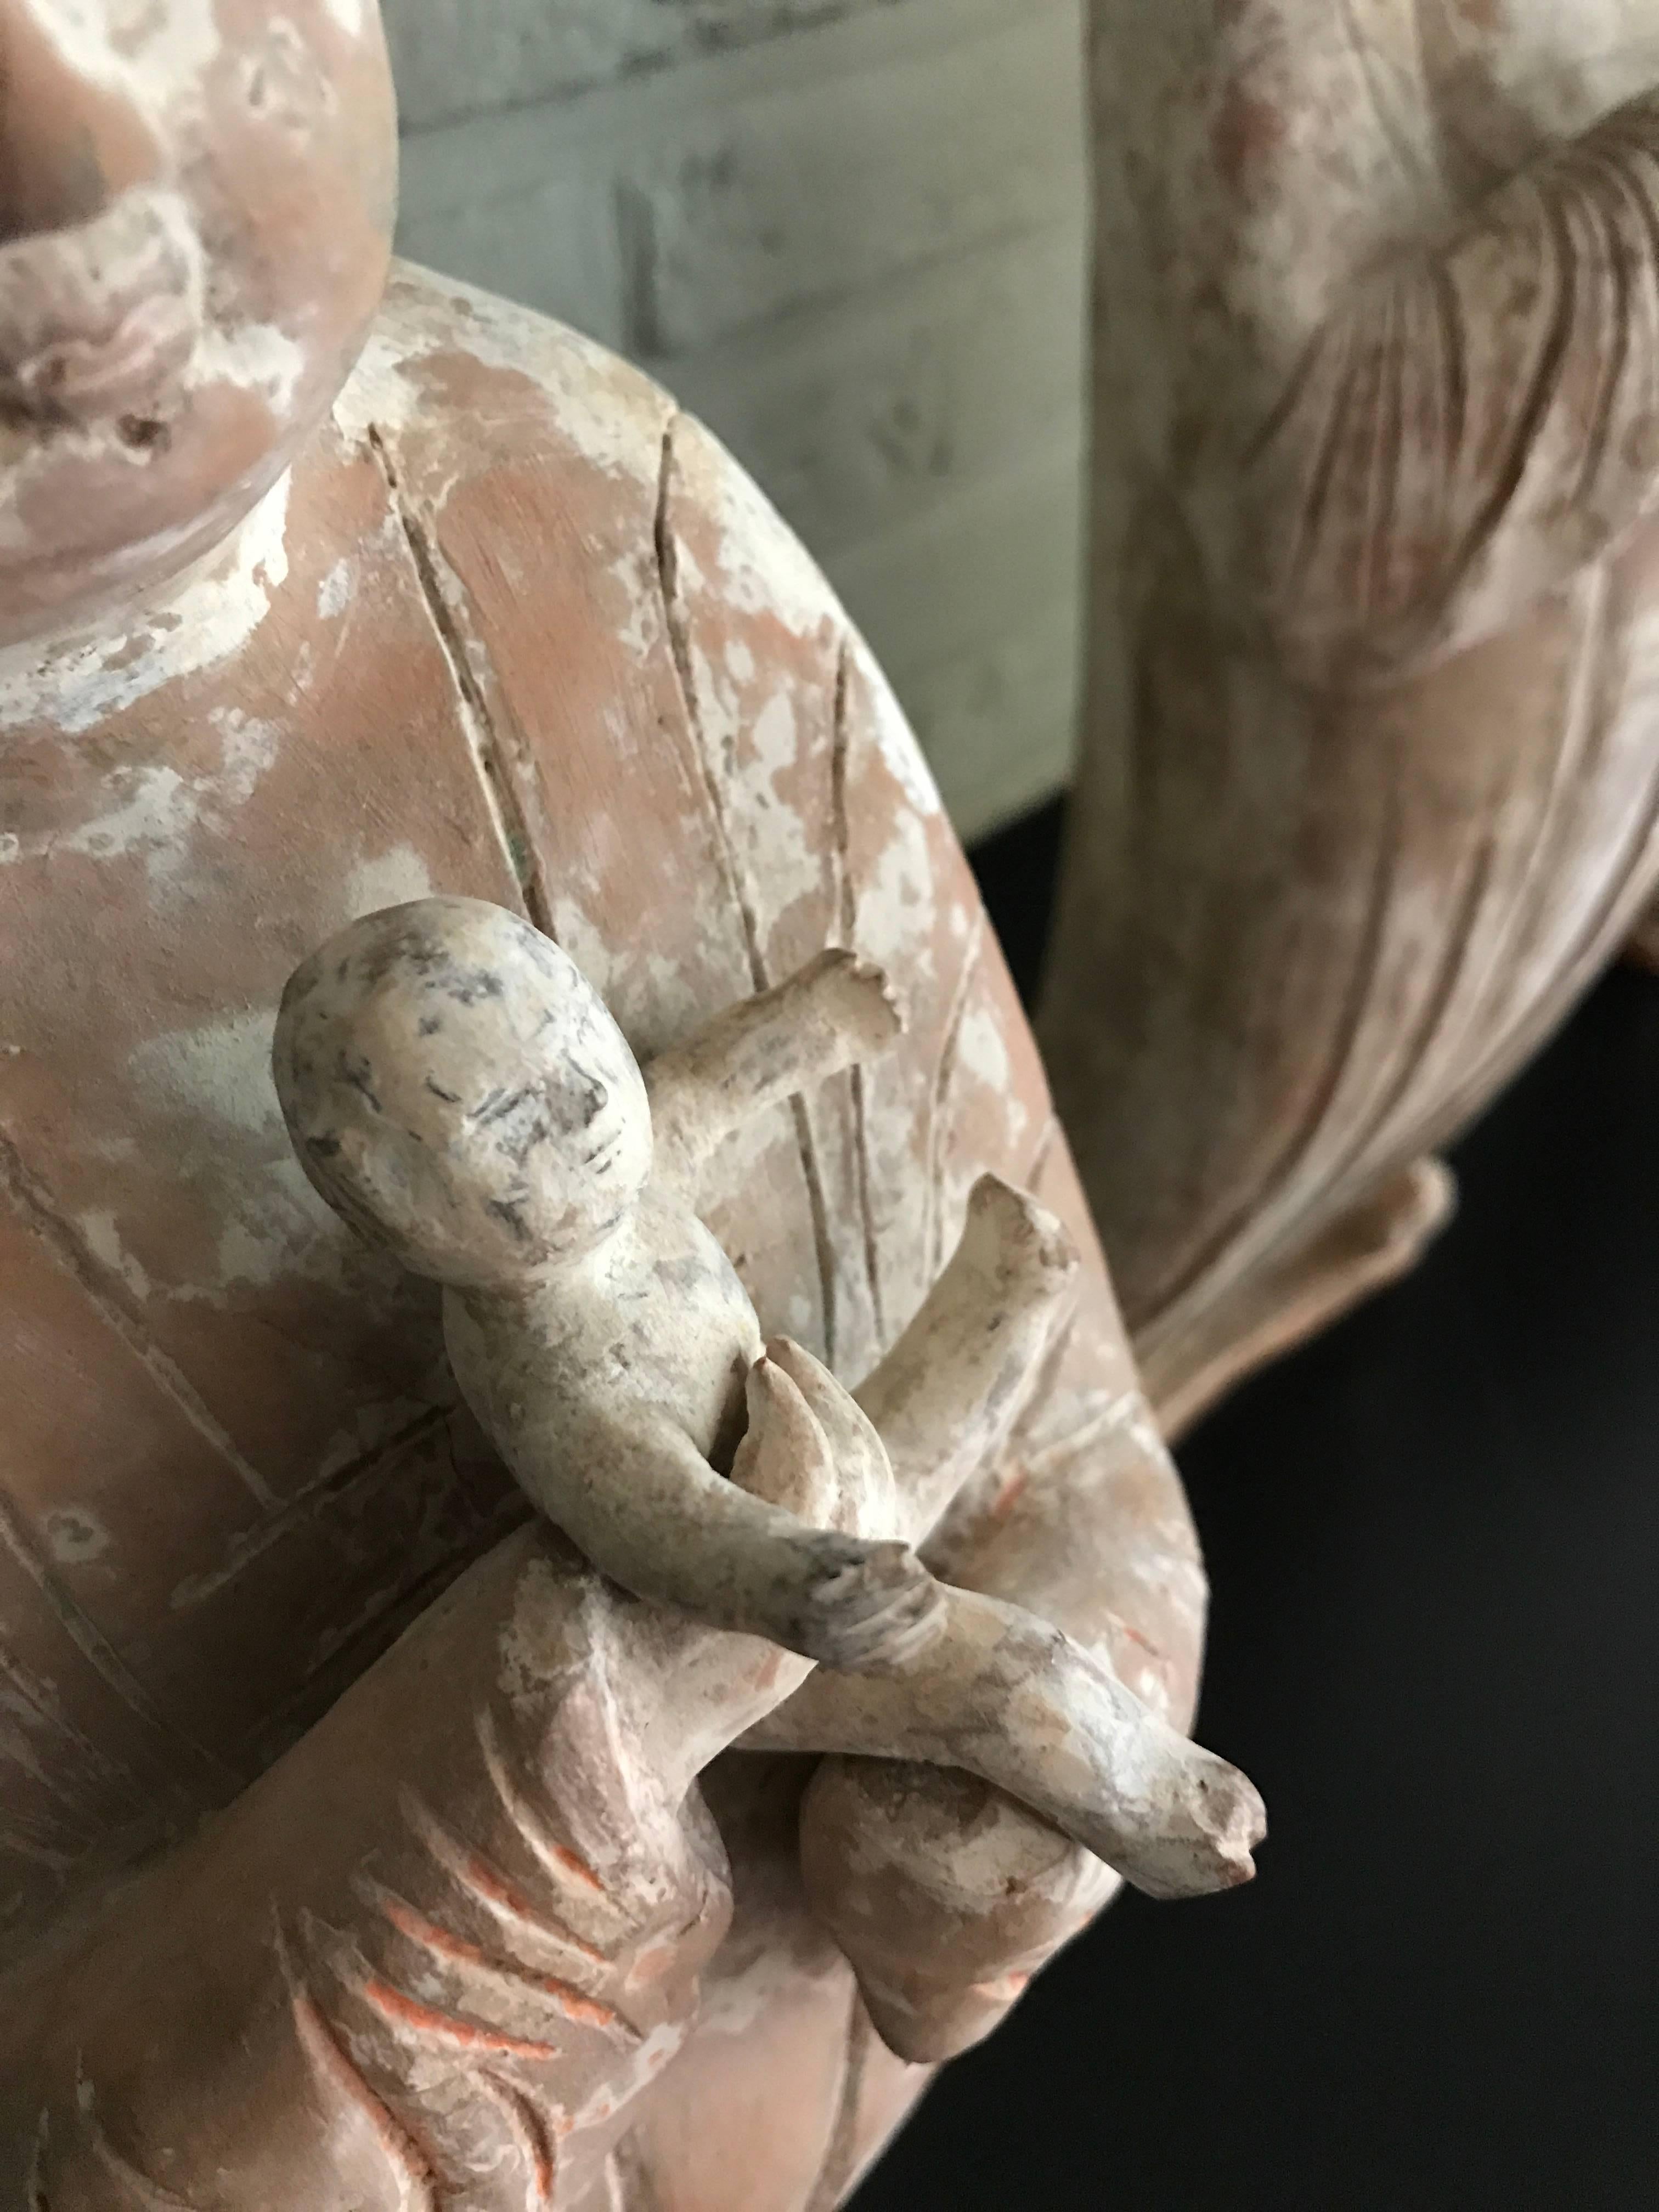 Chinese Three Tang Dynasty Fat Ladies 618-907ad Tl Test Authenticity Test
! For Sale